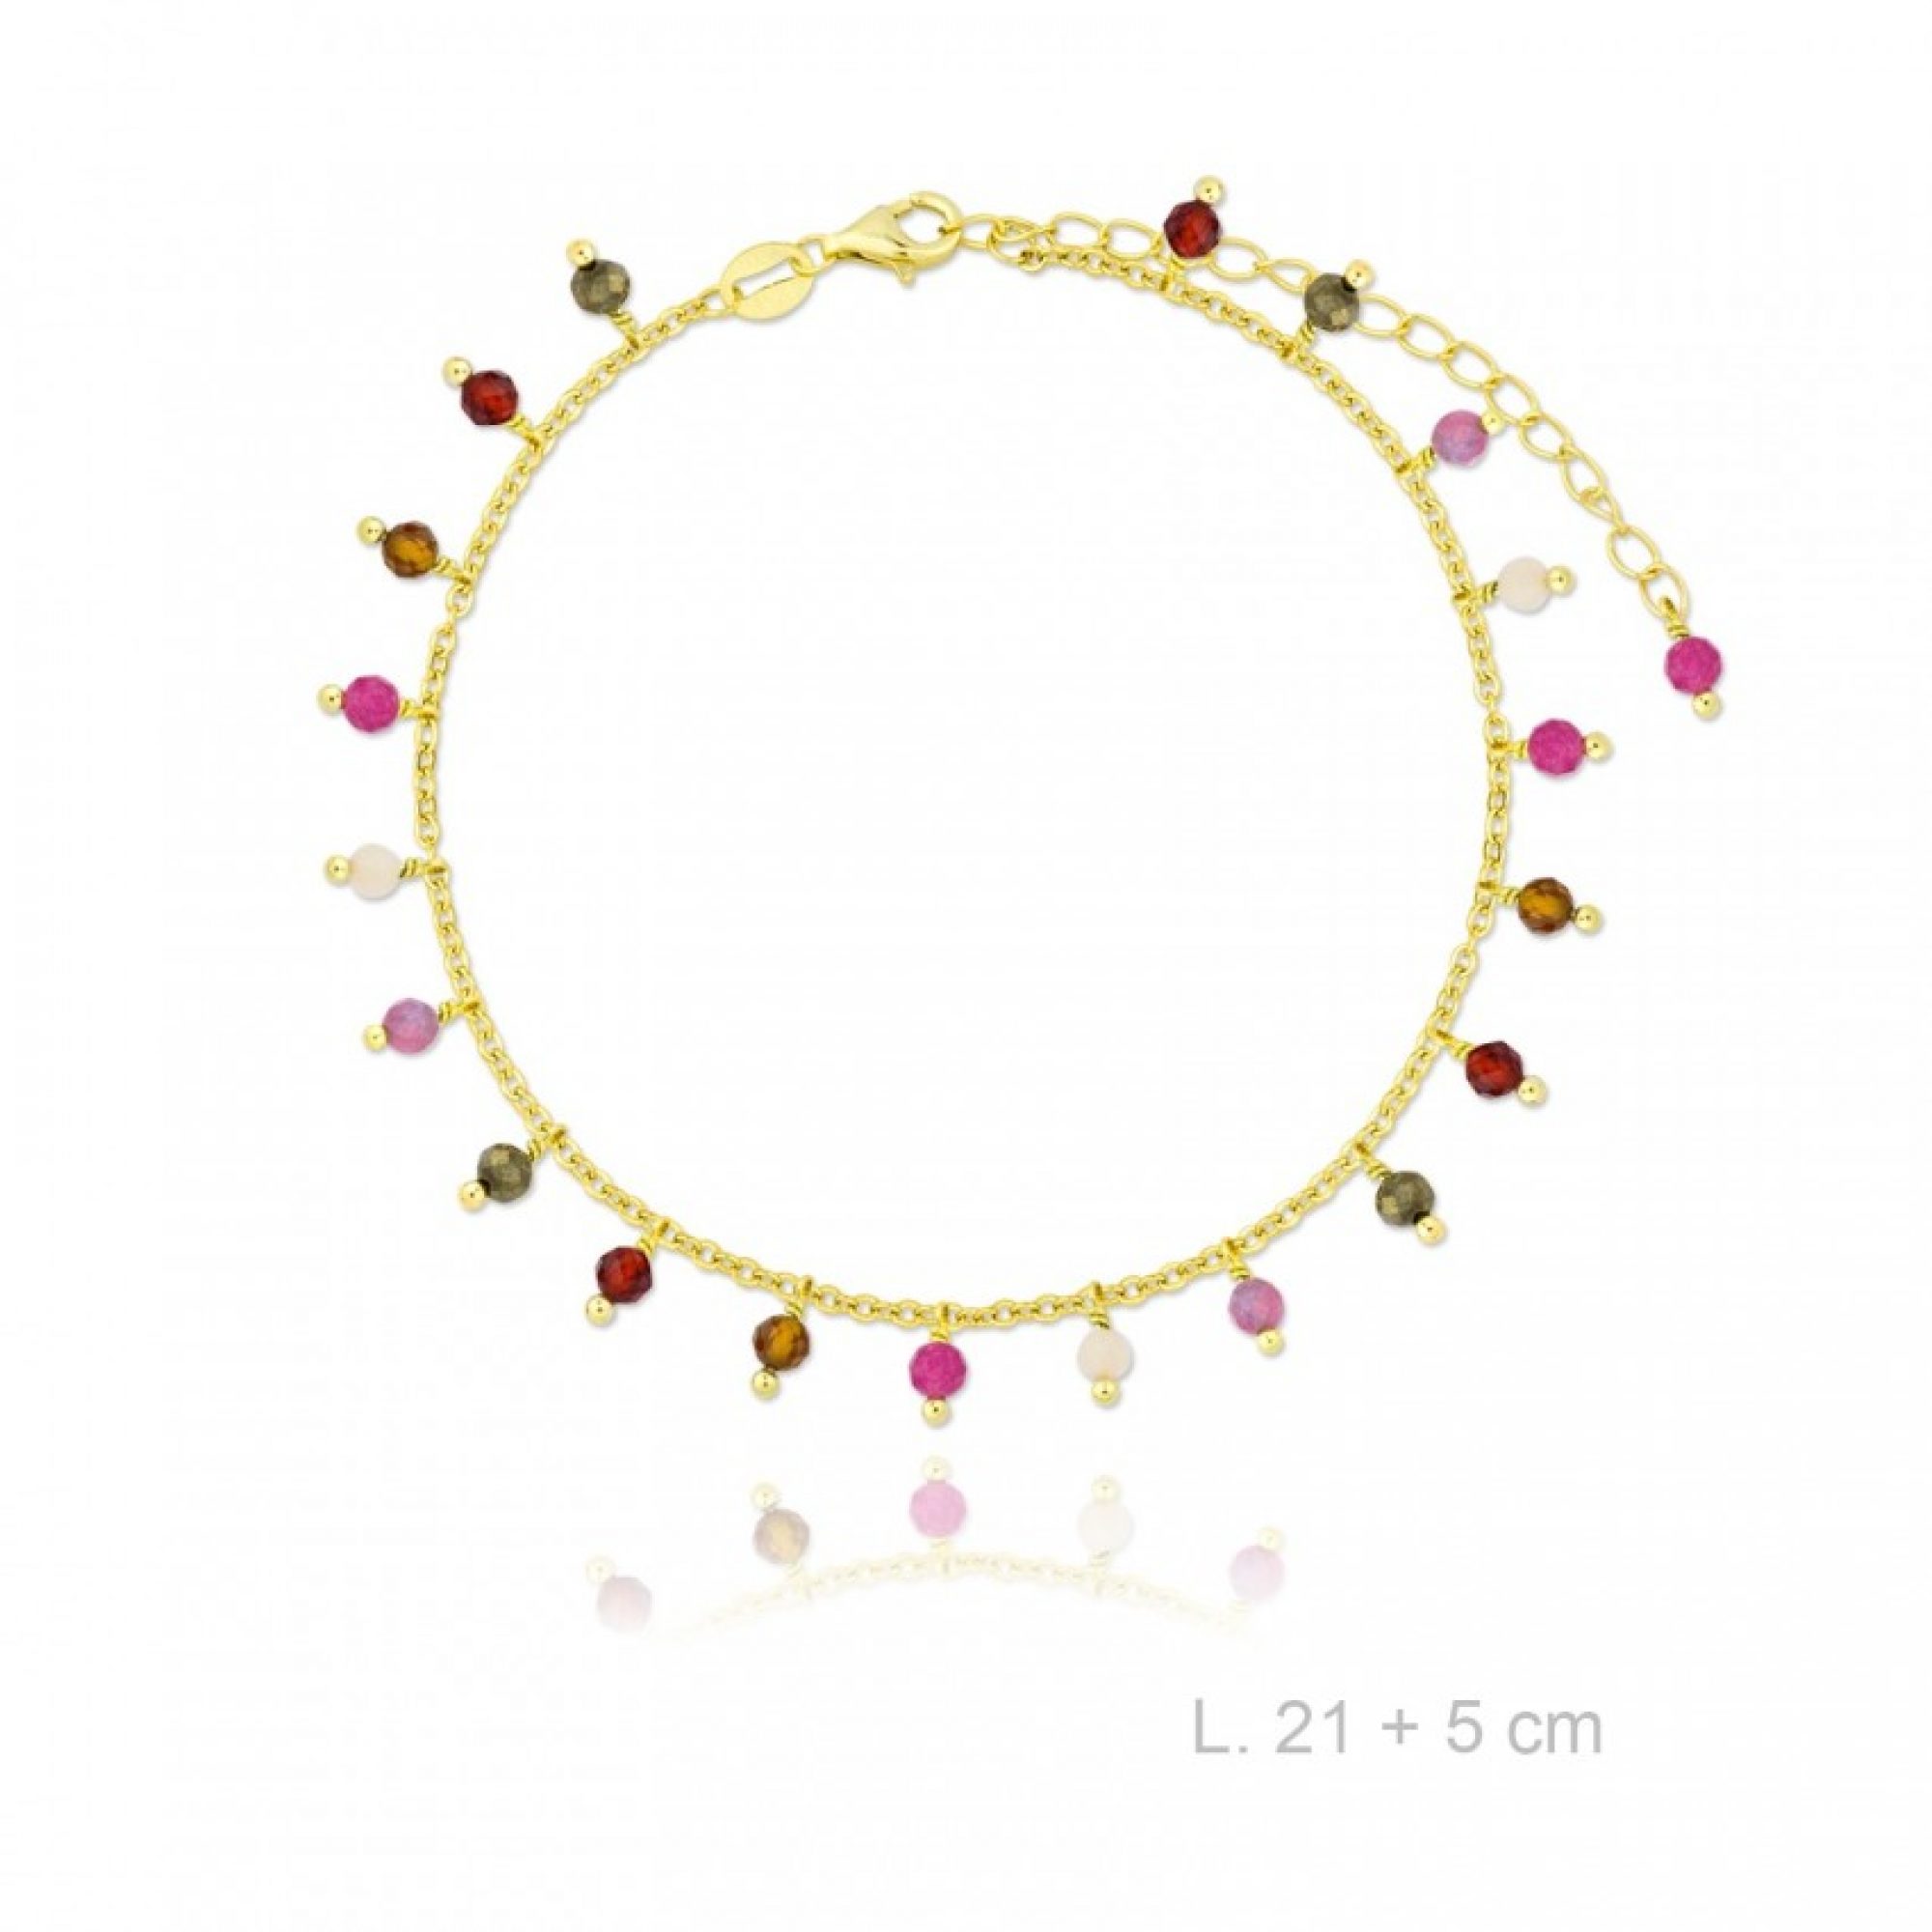 Gold plated anklet with dangles